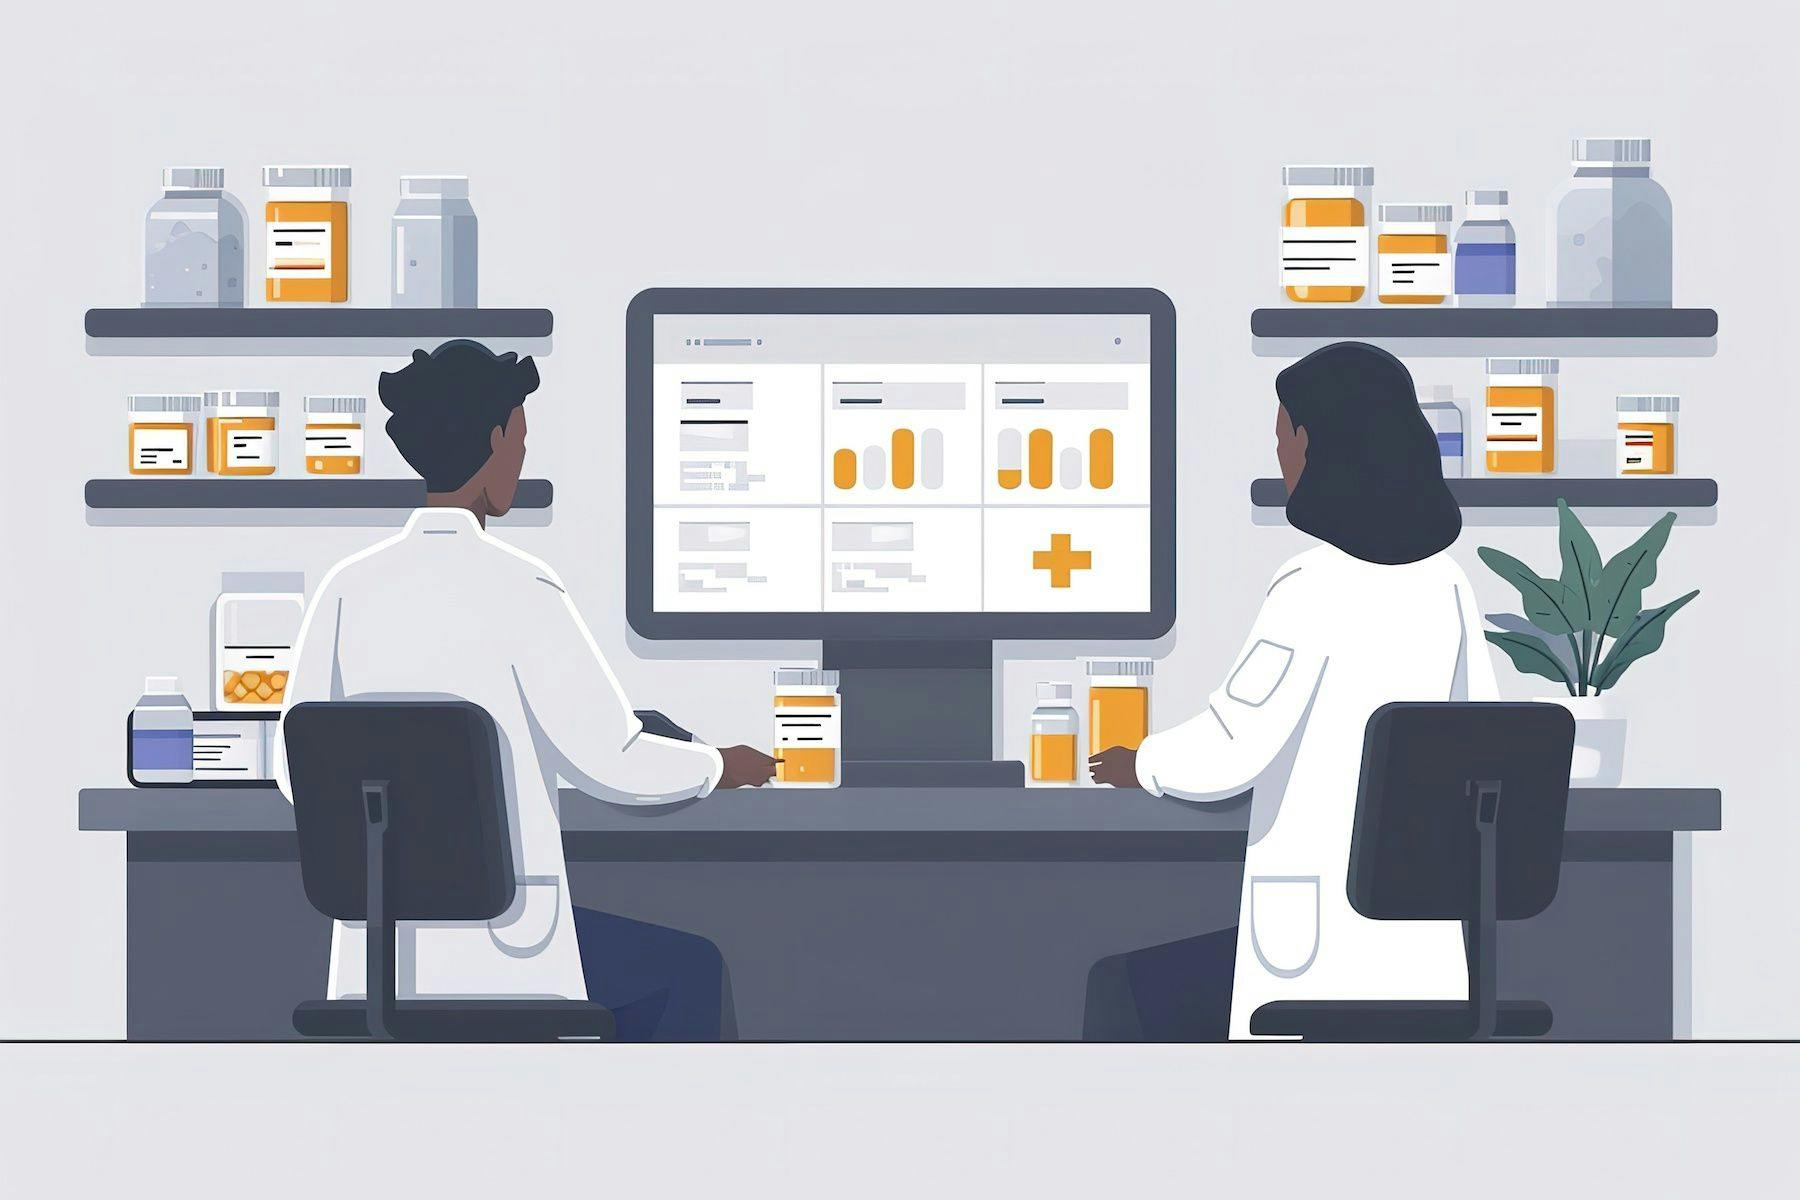 Telepharmacy Empowers Pharmacists Practicing in a Changing Landscape